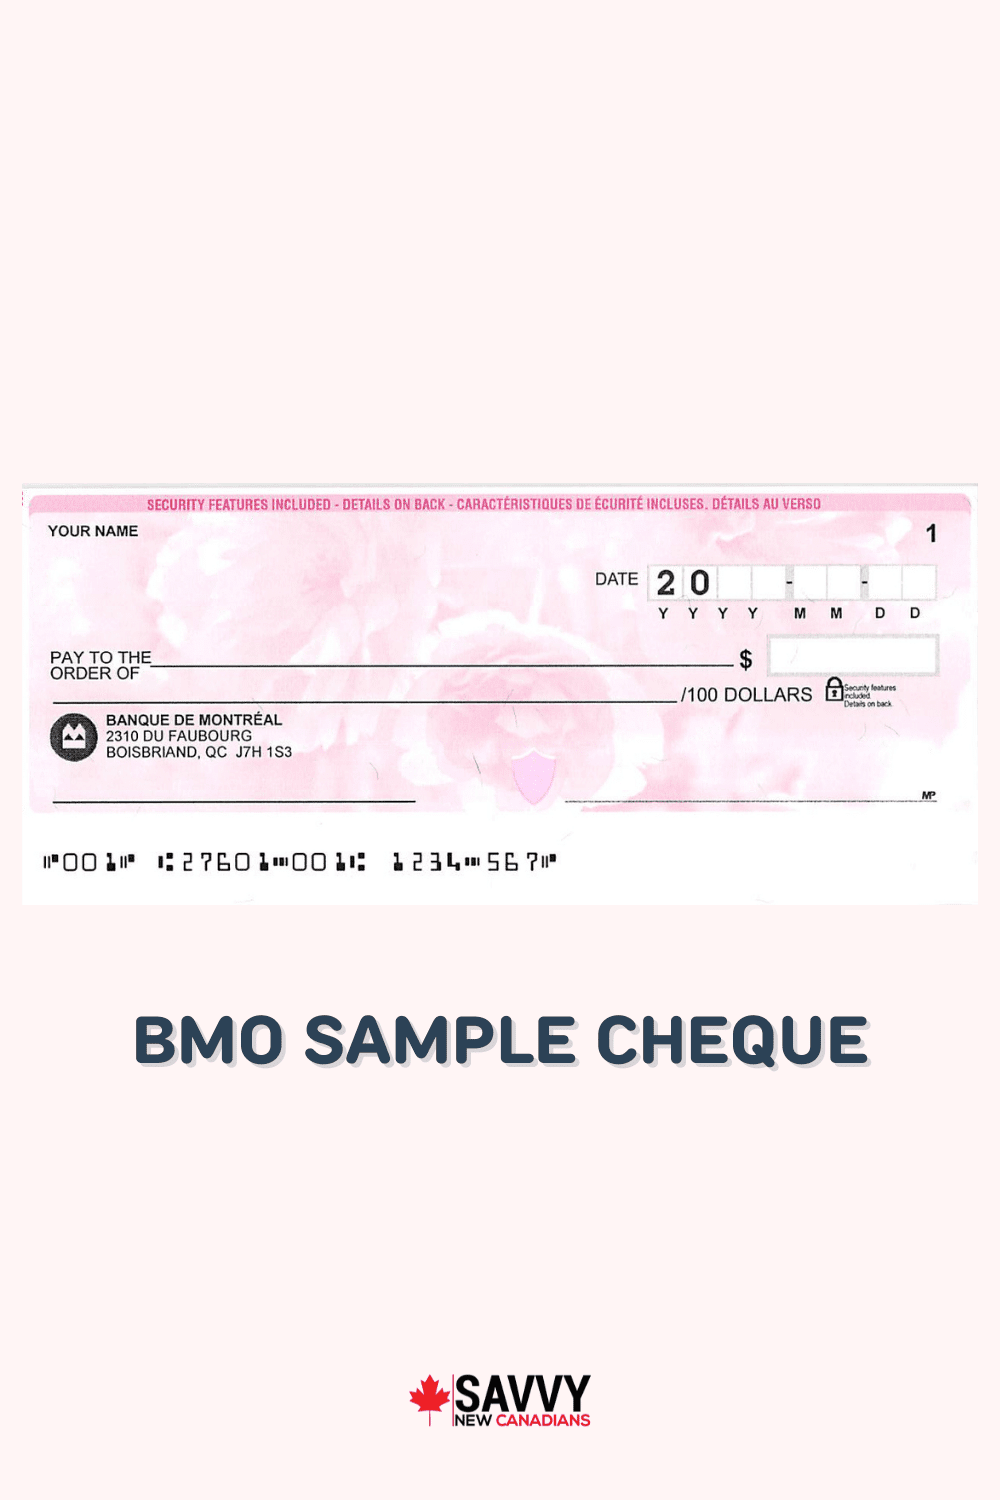 BMO Sample Cheque: How To Read and Get a BMO Void Cheque 2022